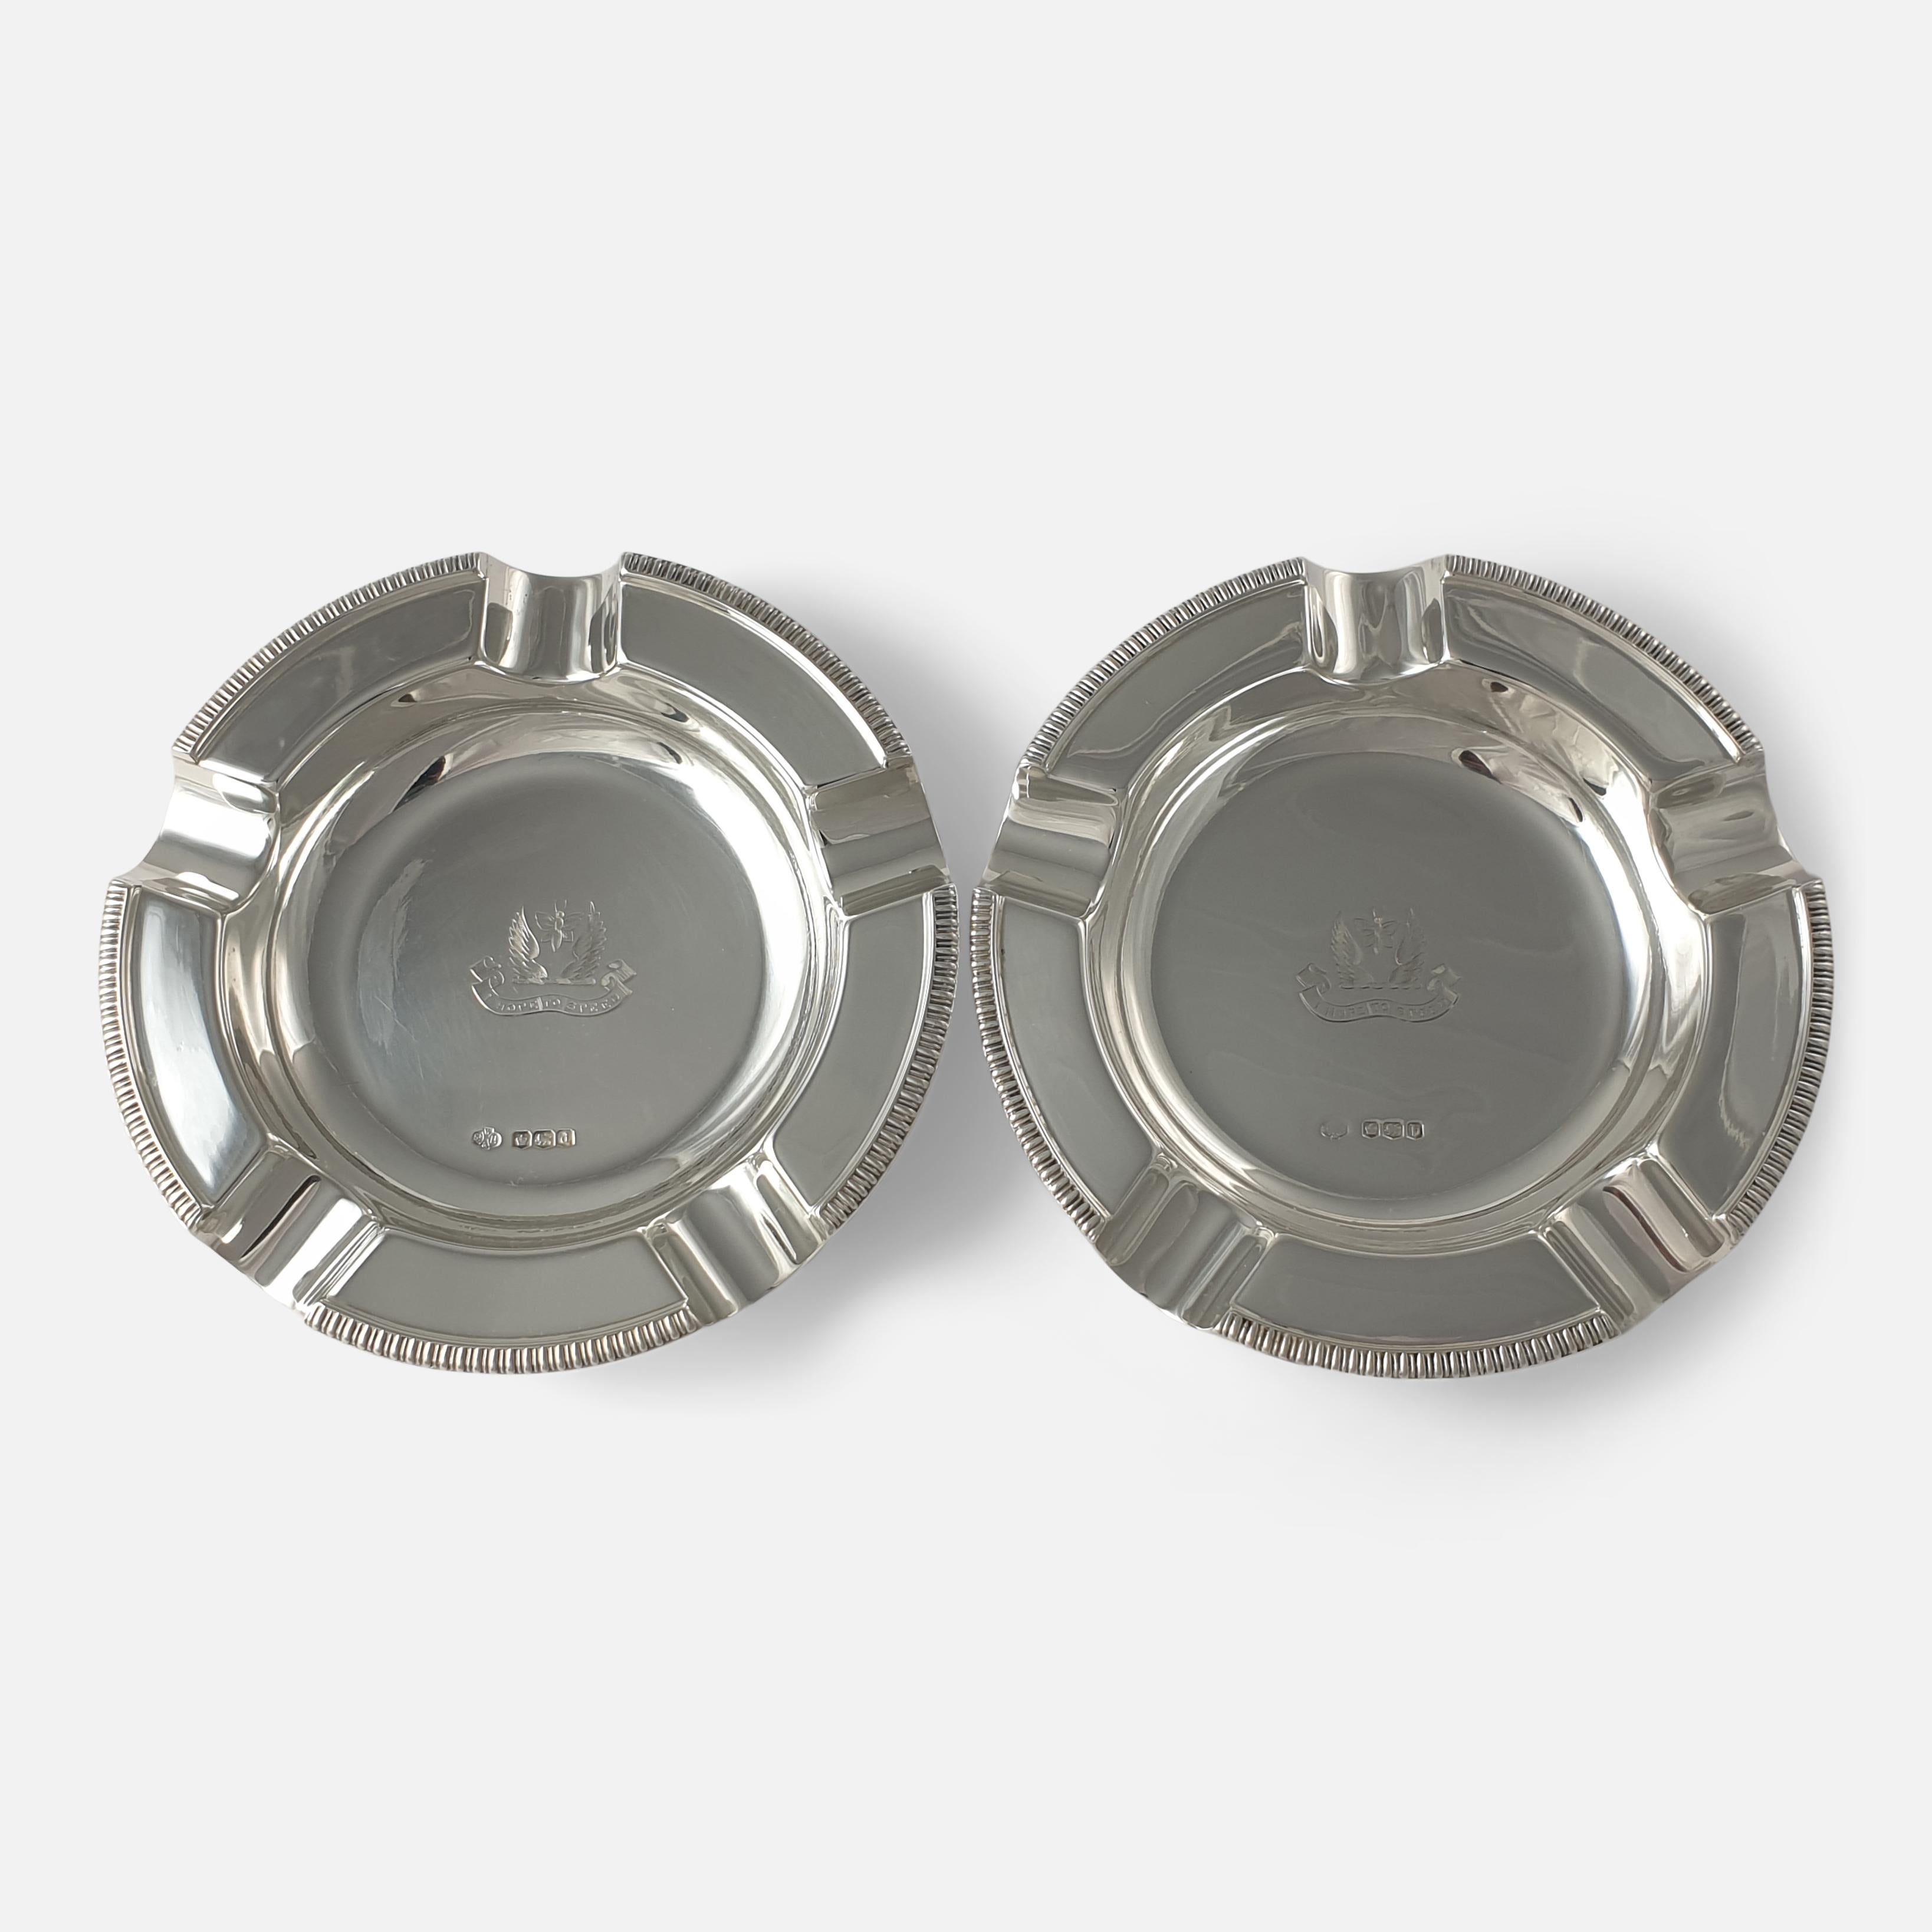 Pair of Sterling Silver Crested Ashtrays, William Hutton & Sons For Sale 5